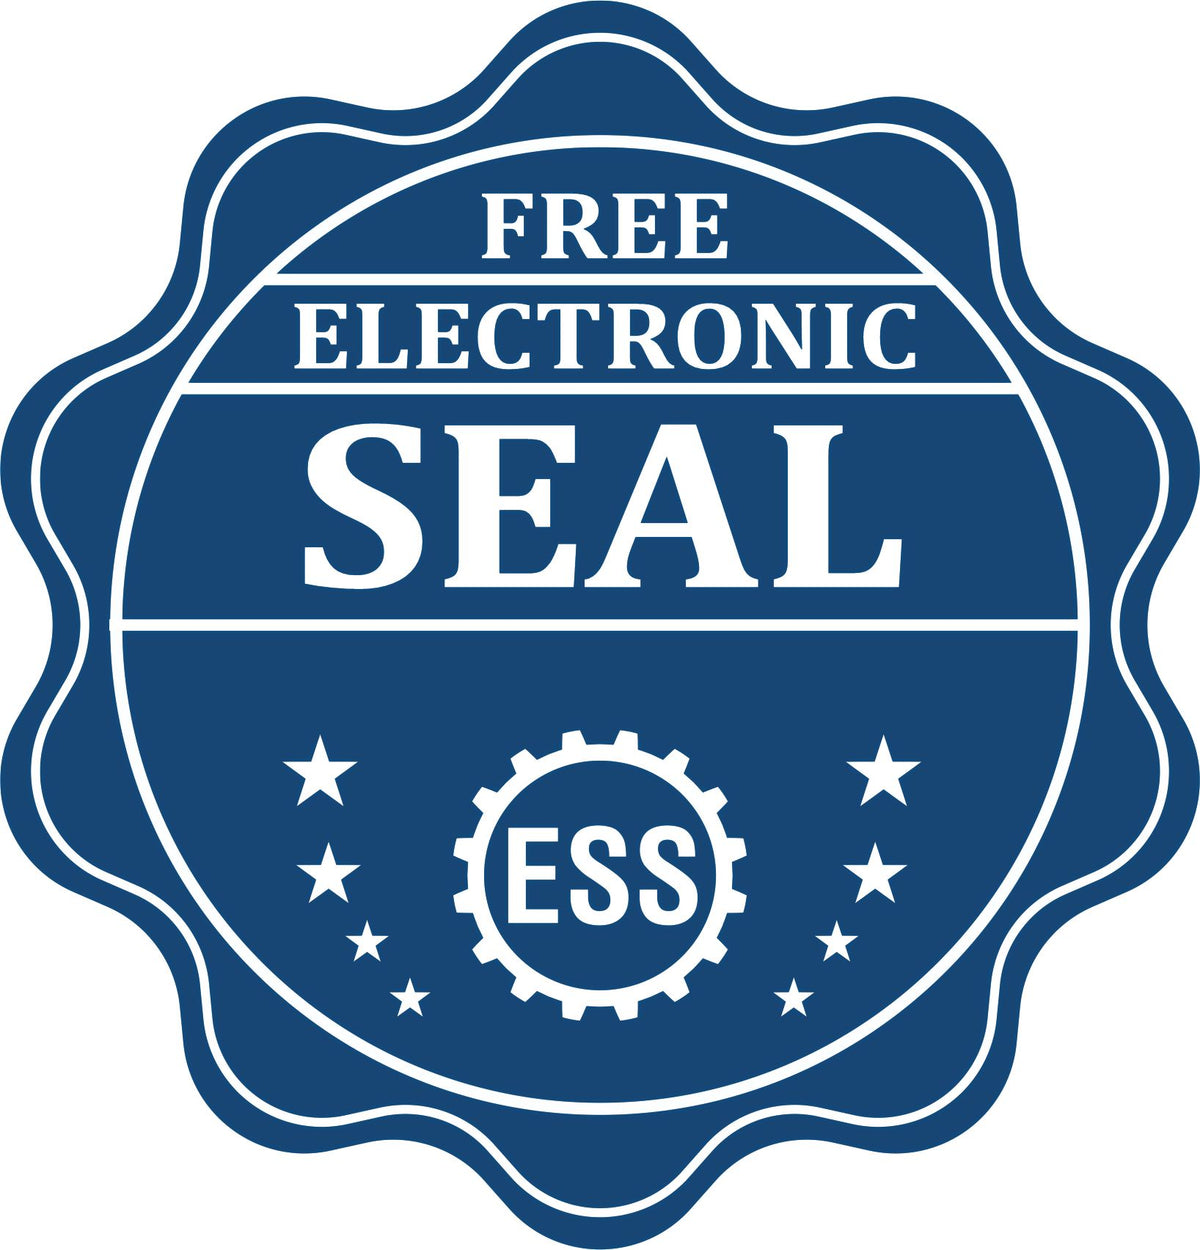 A badge showing a free electronic seal for the Minnesota Engineer Desk Seal with stars and the ESS gear on the emblem.